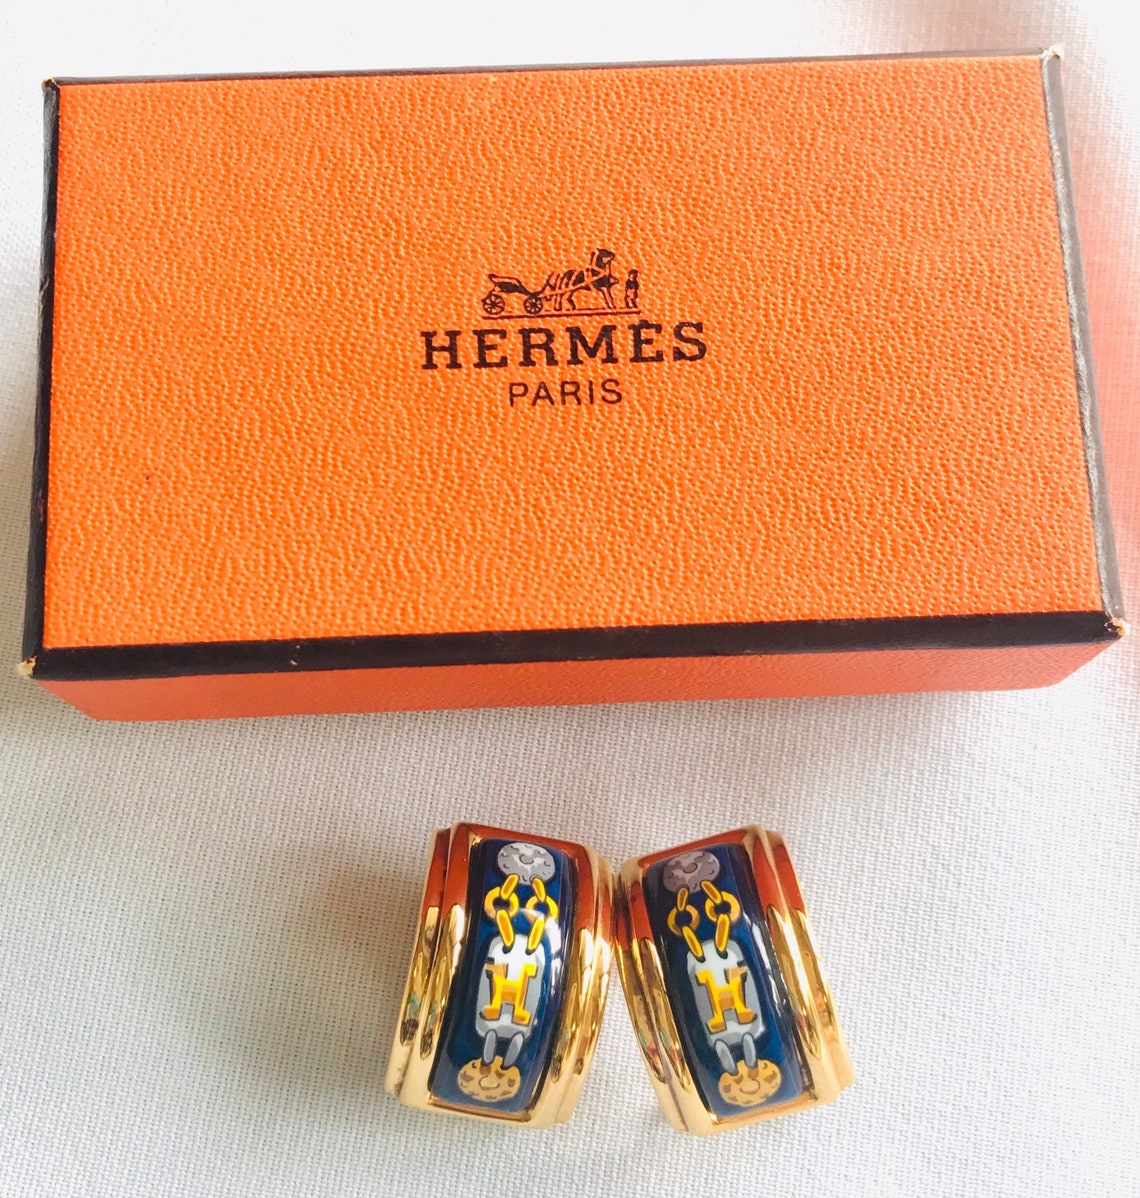 Vintage Hermes cloisonne golden earrings with blue and yellow | Etsy